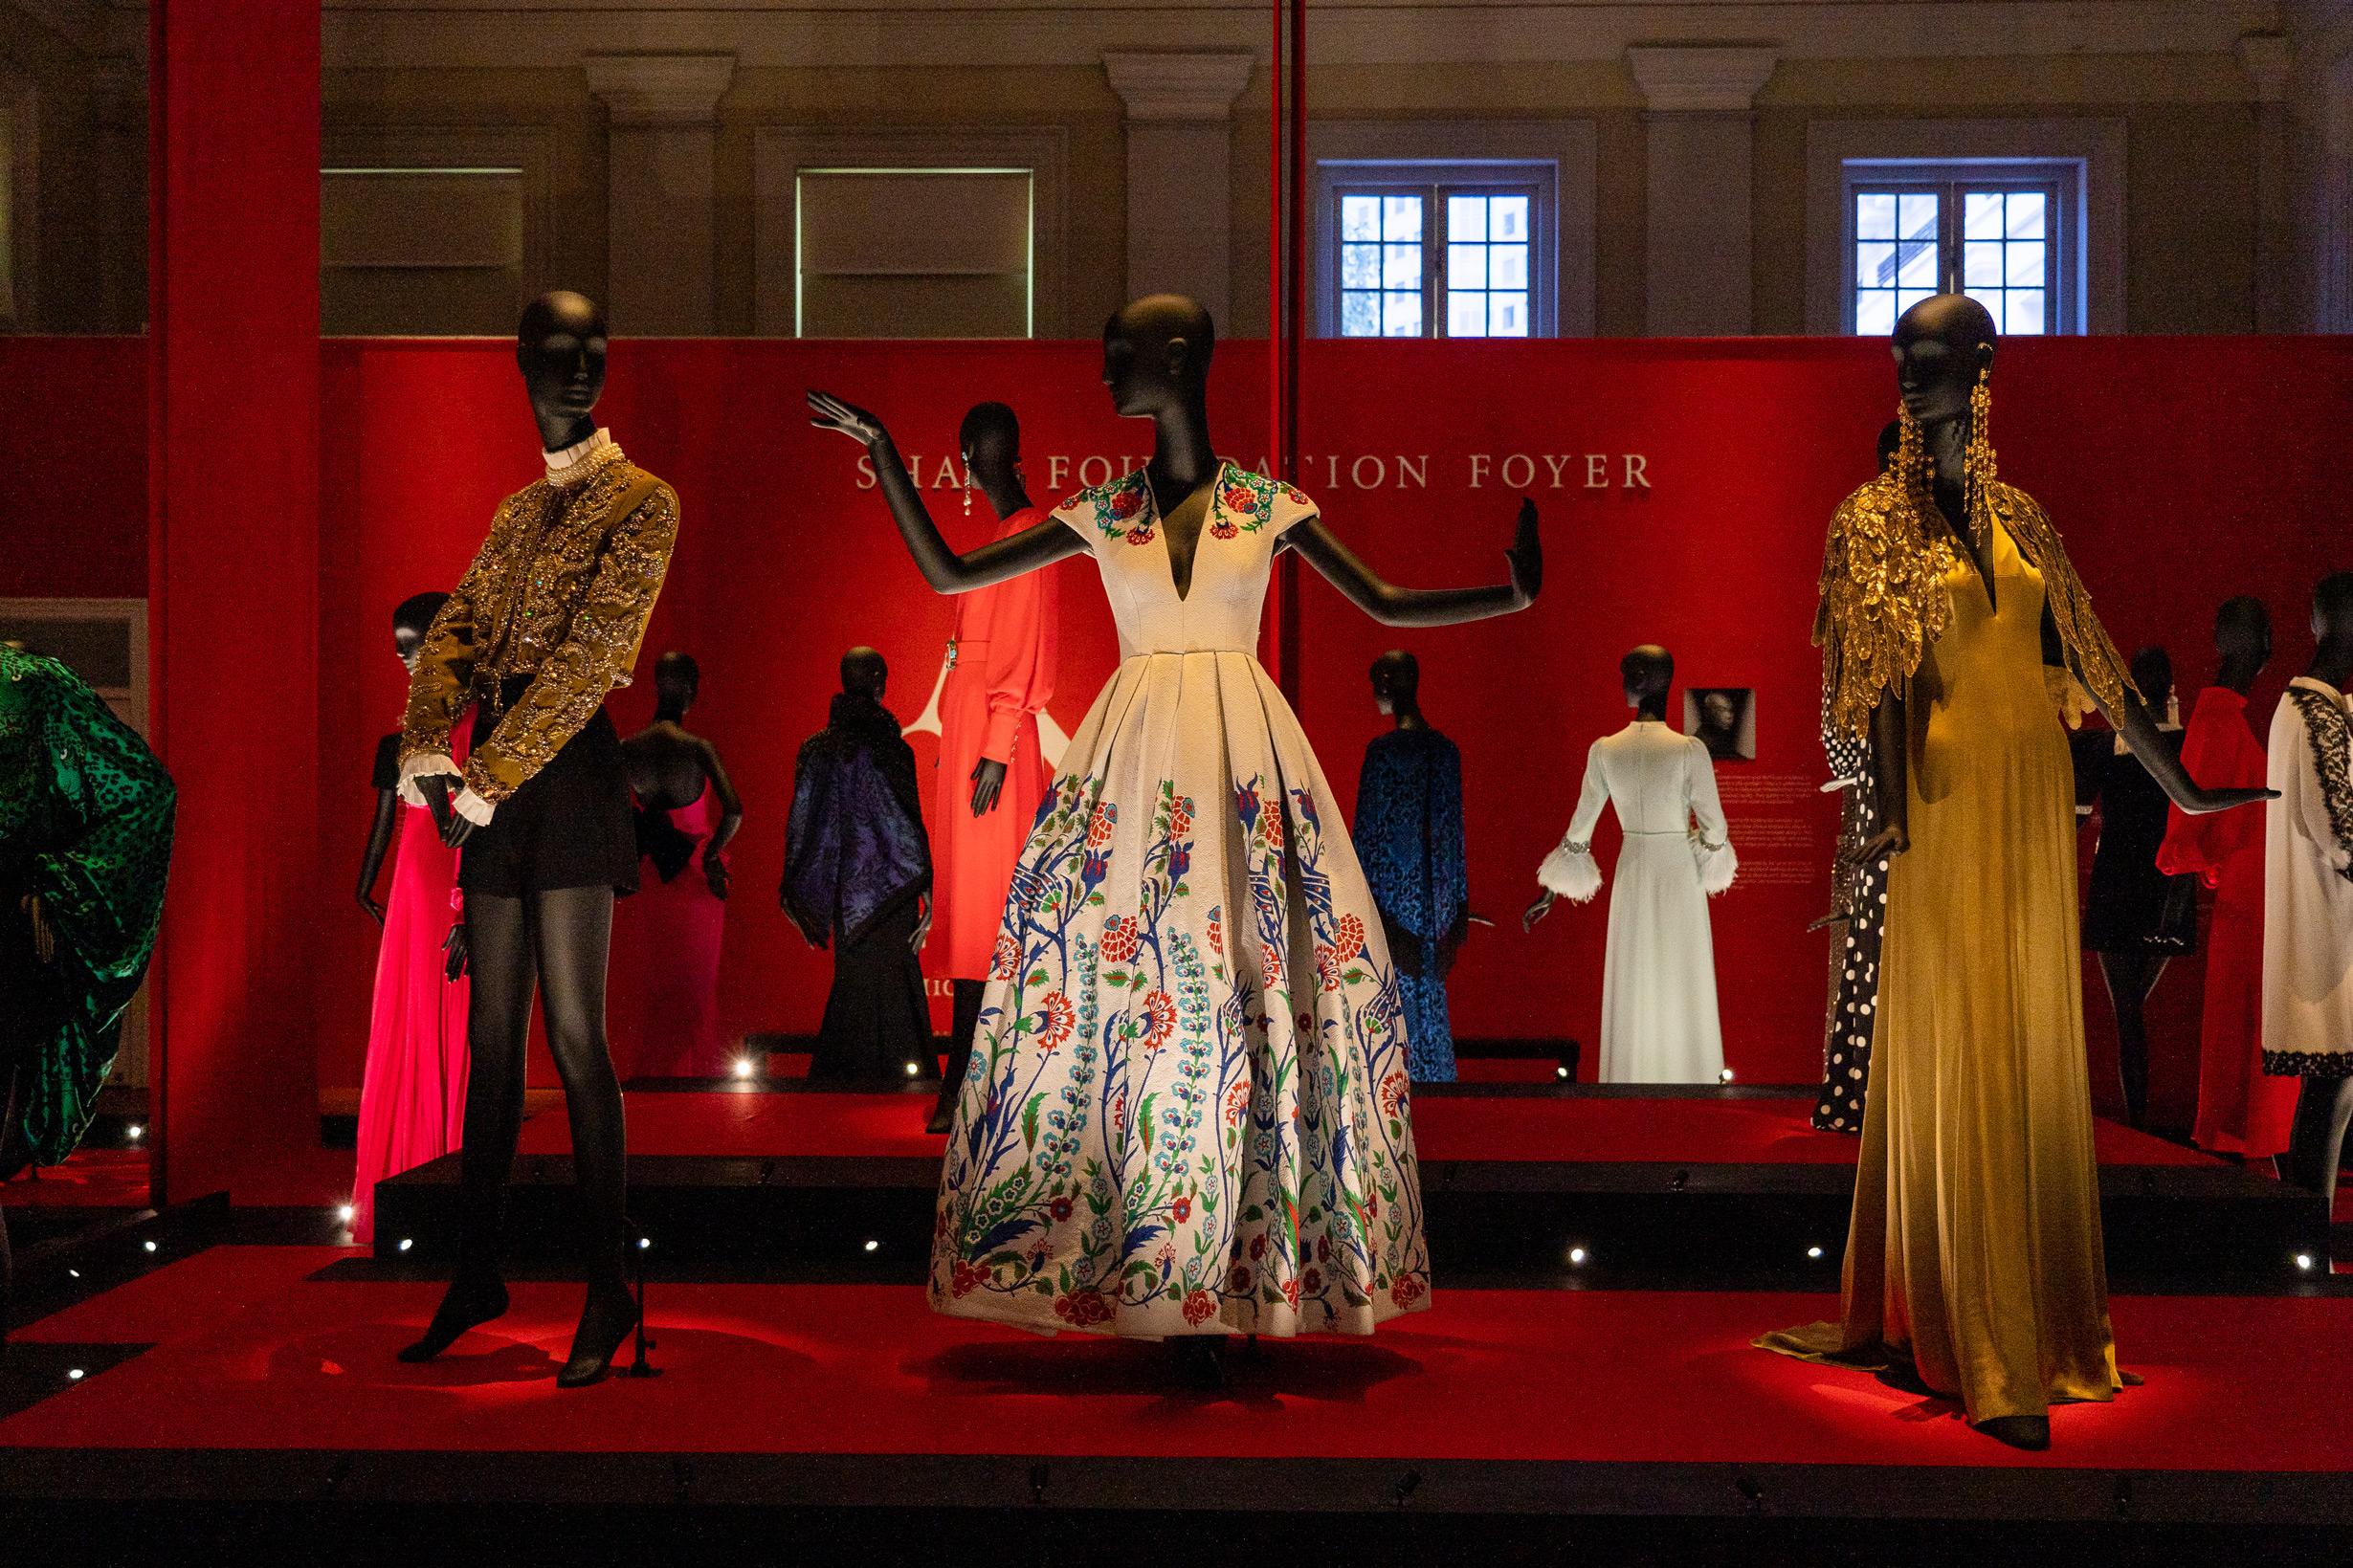 Showcase of the dresses in the ‘In The Global Eye’ section of the exhibition which features dresses that were worn by remarkable women.